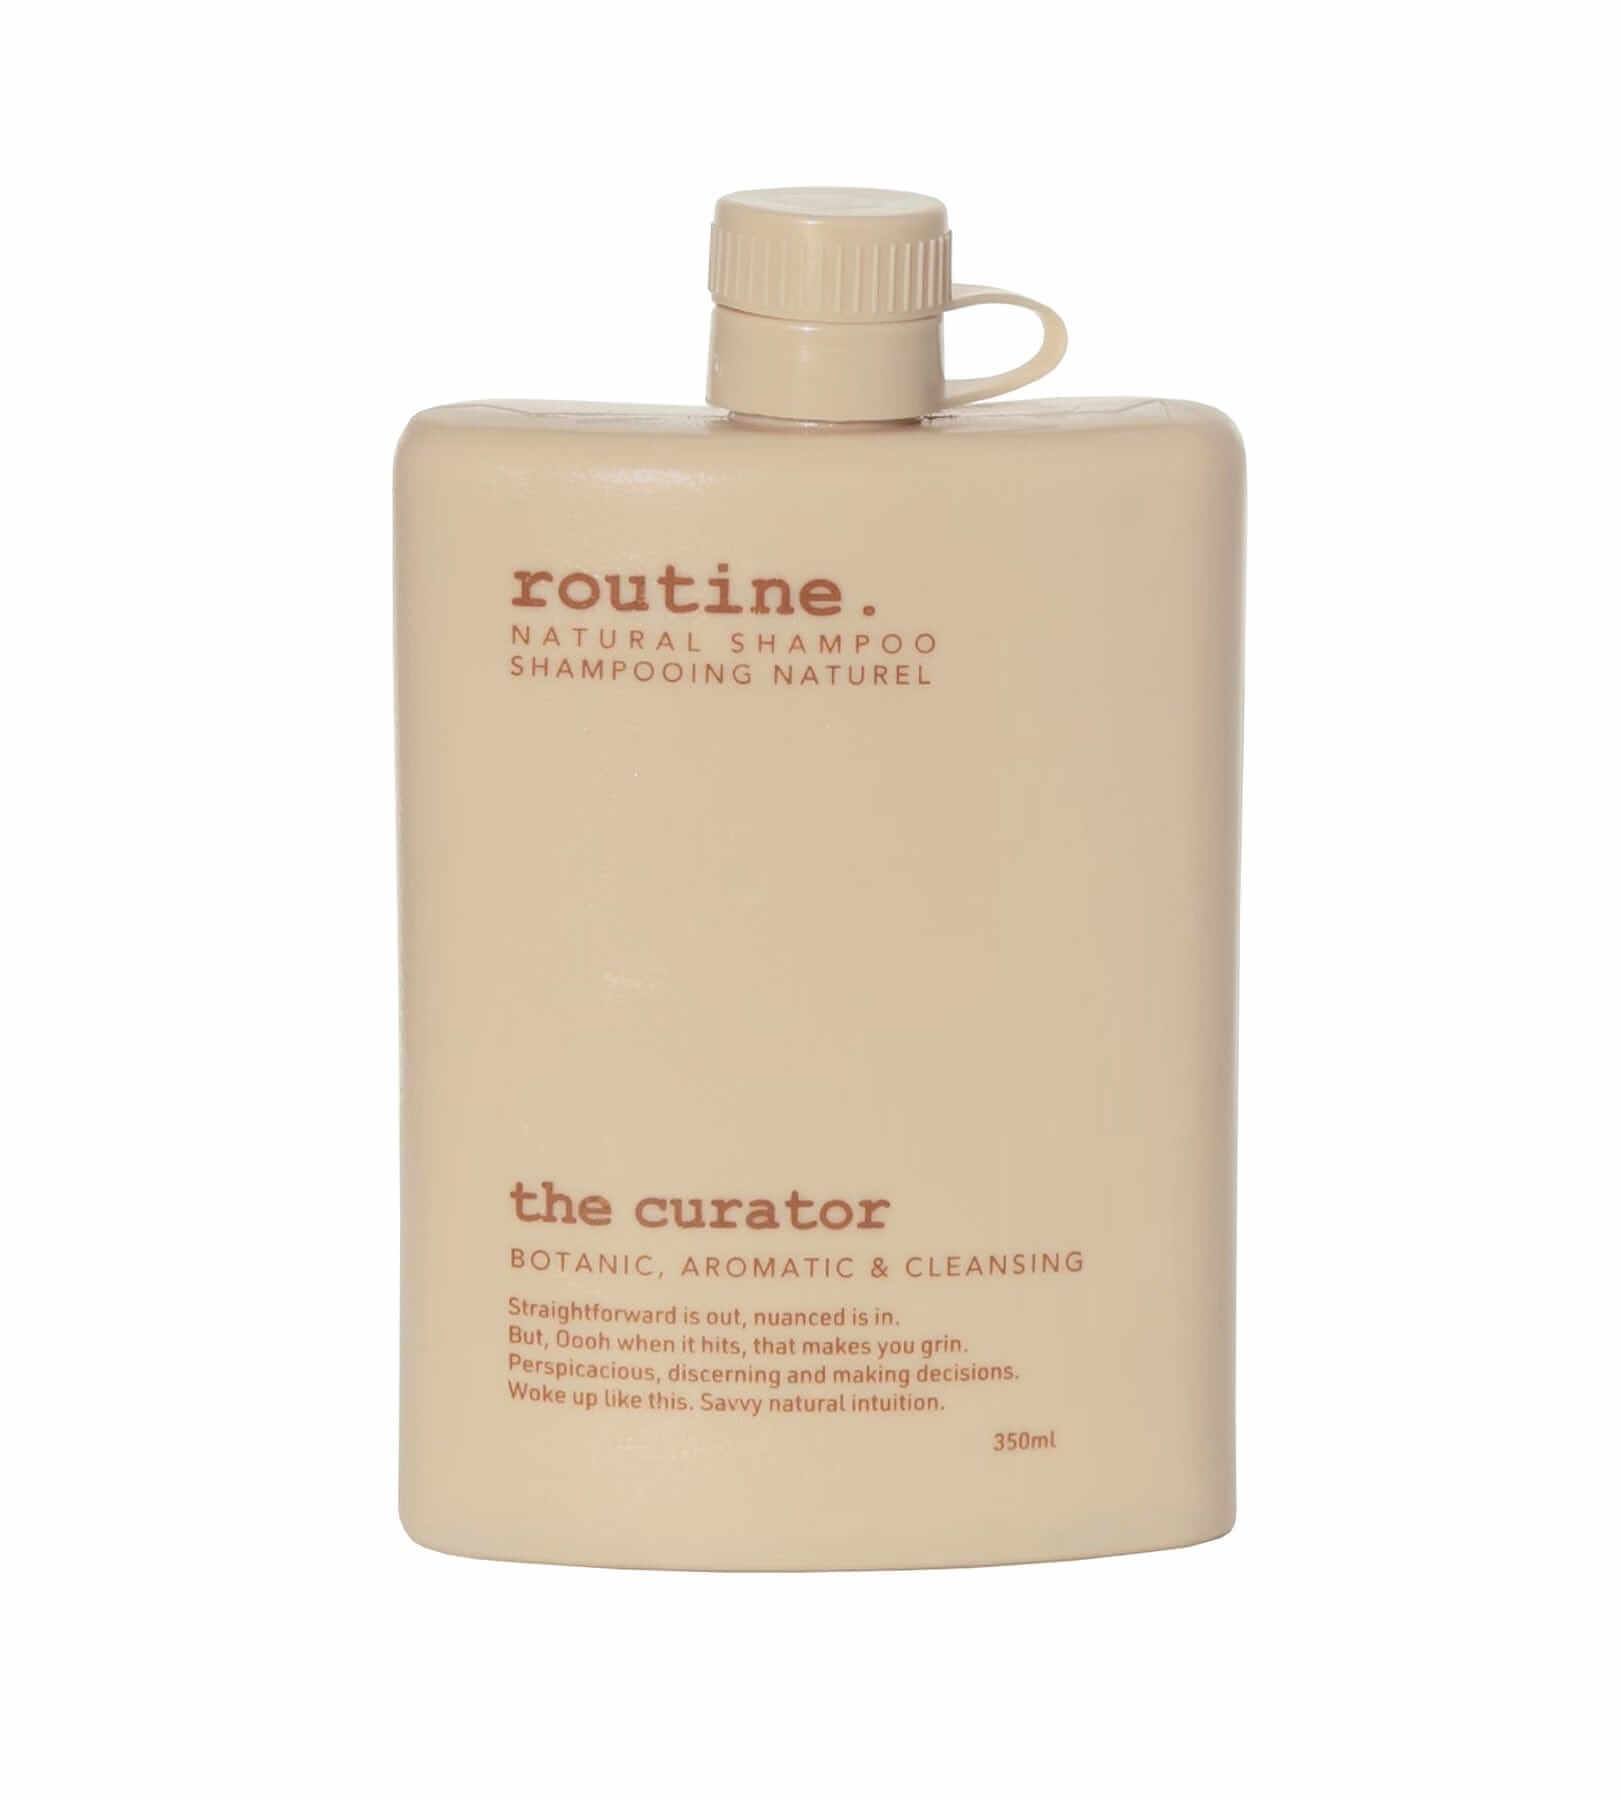 Routine Shampoo Routine, Natural Shampoo, The Curator, made in Calgary